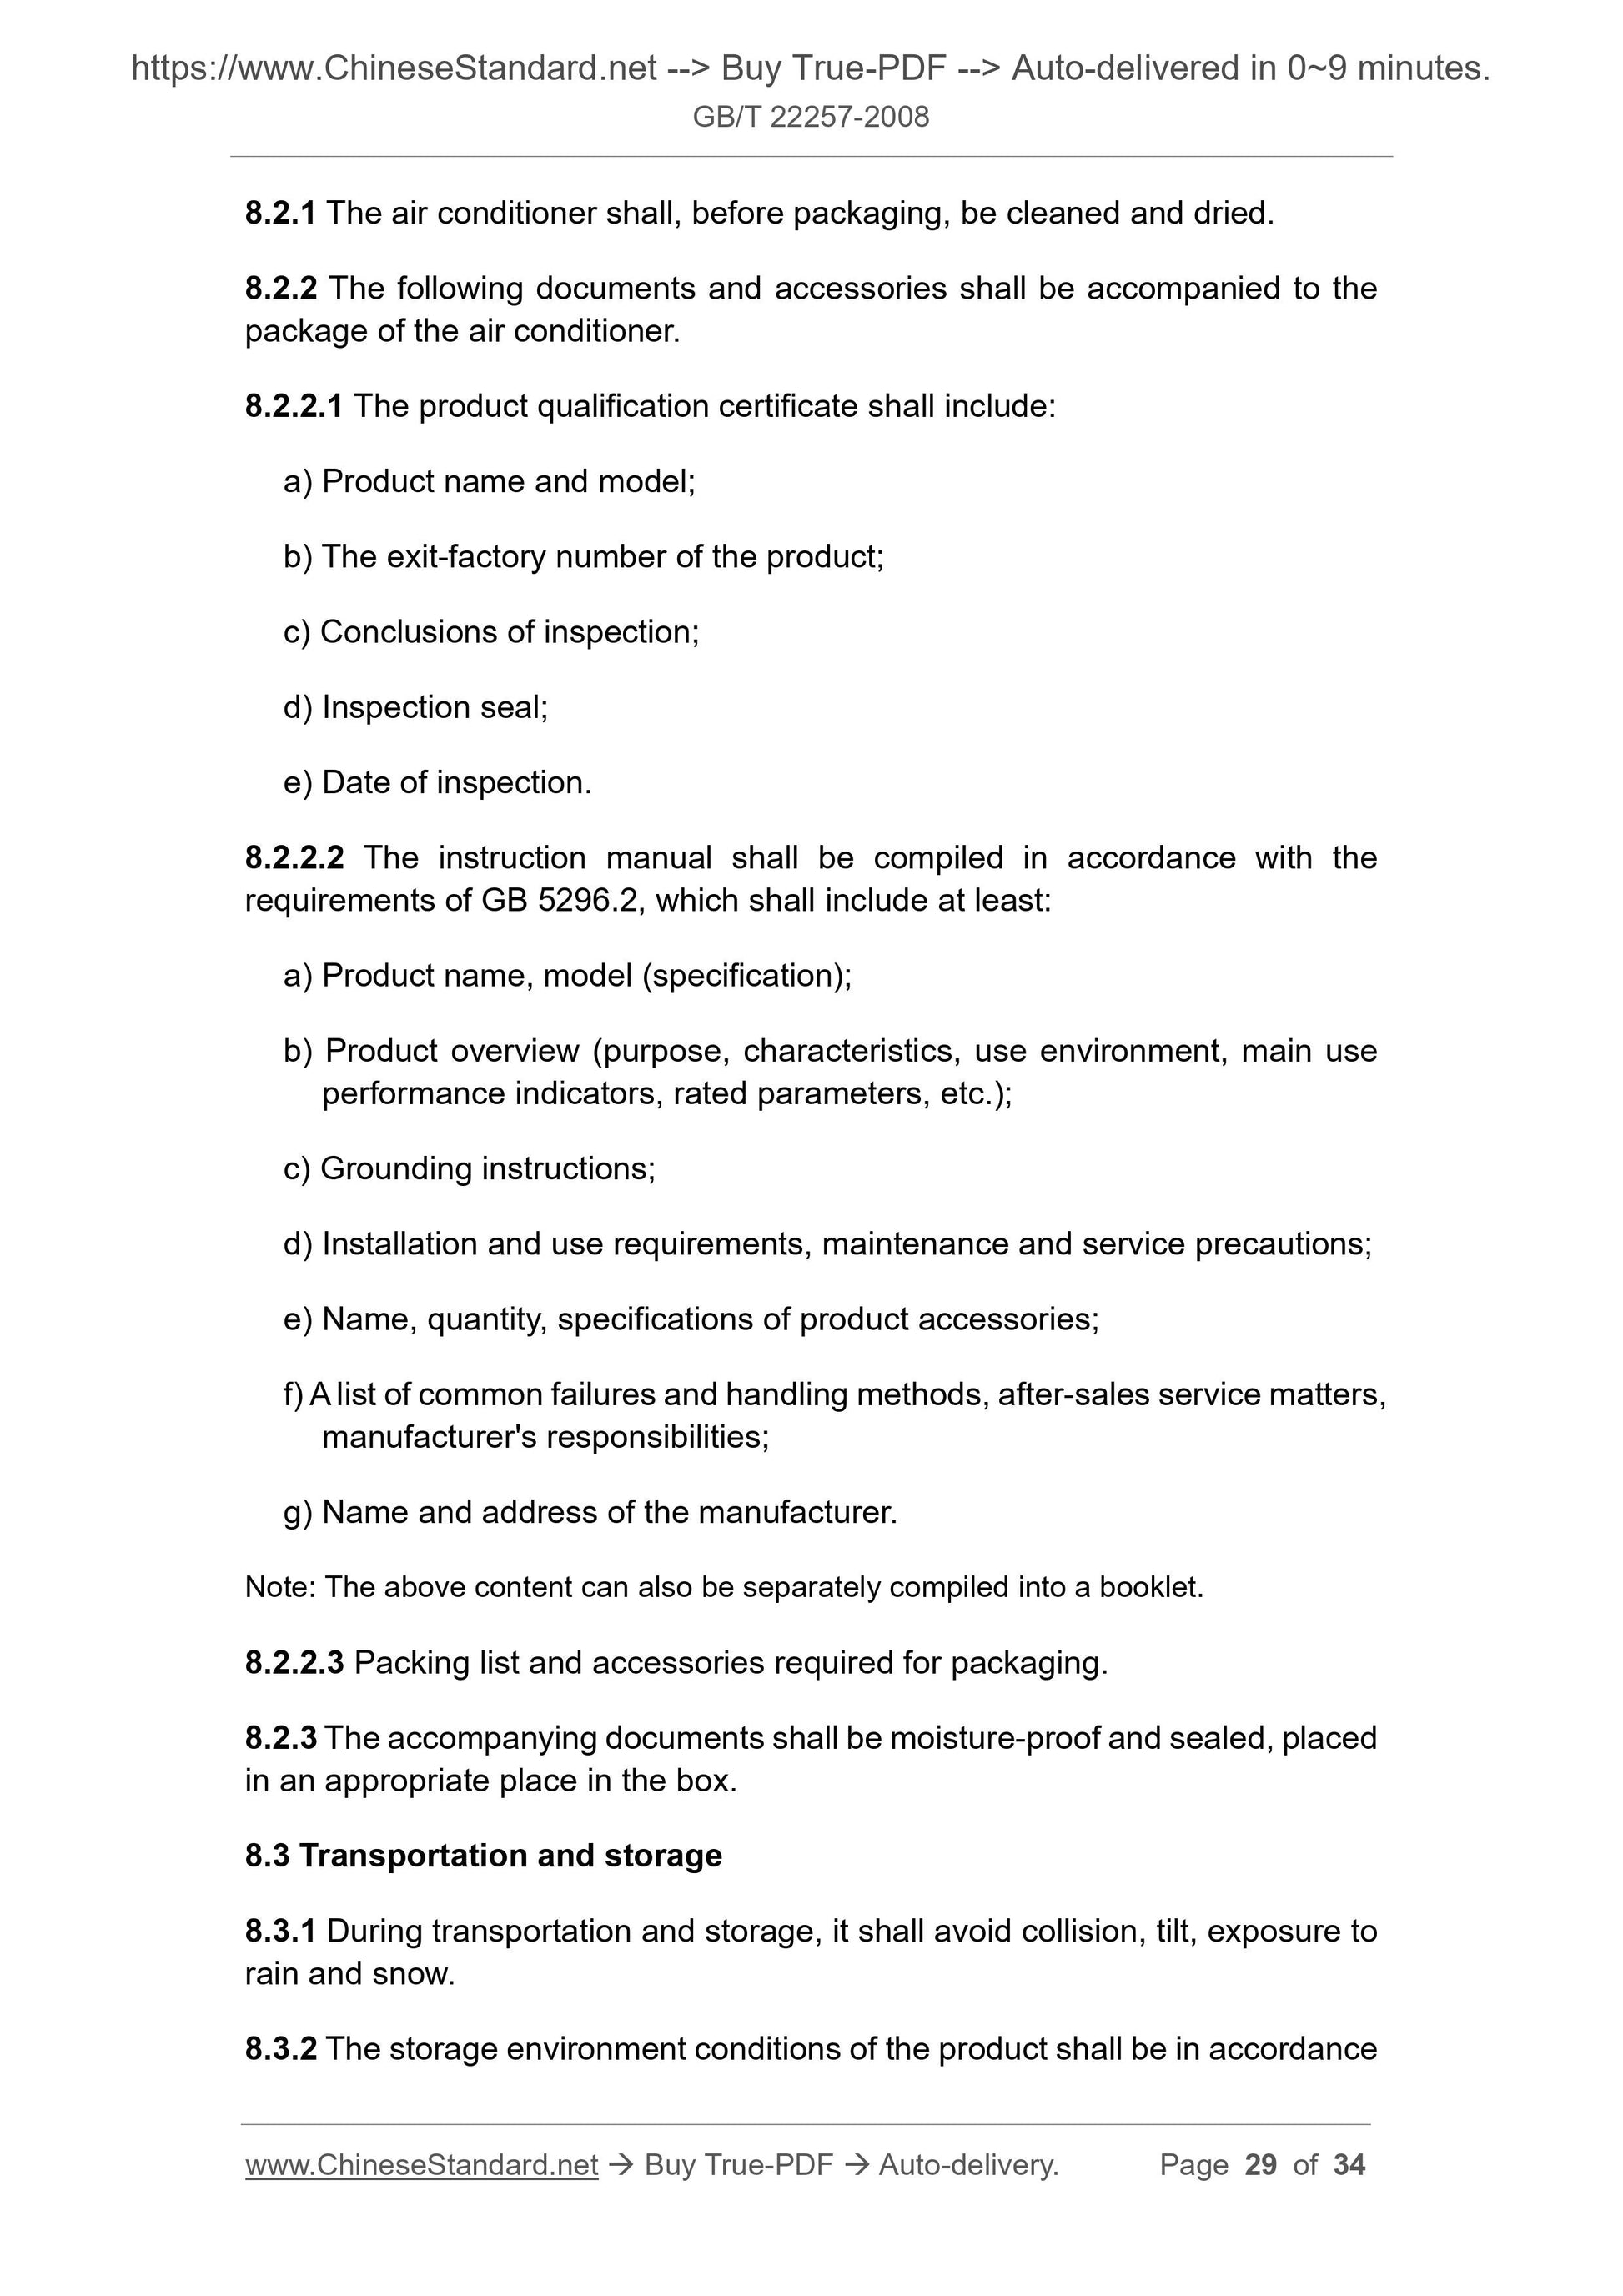 GB/T 22257-2008 Page 11